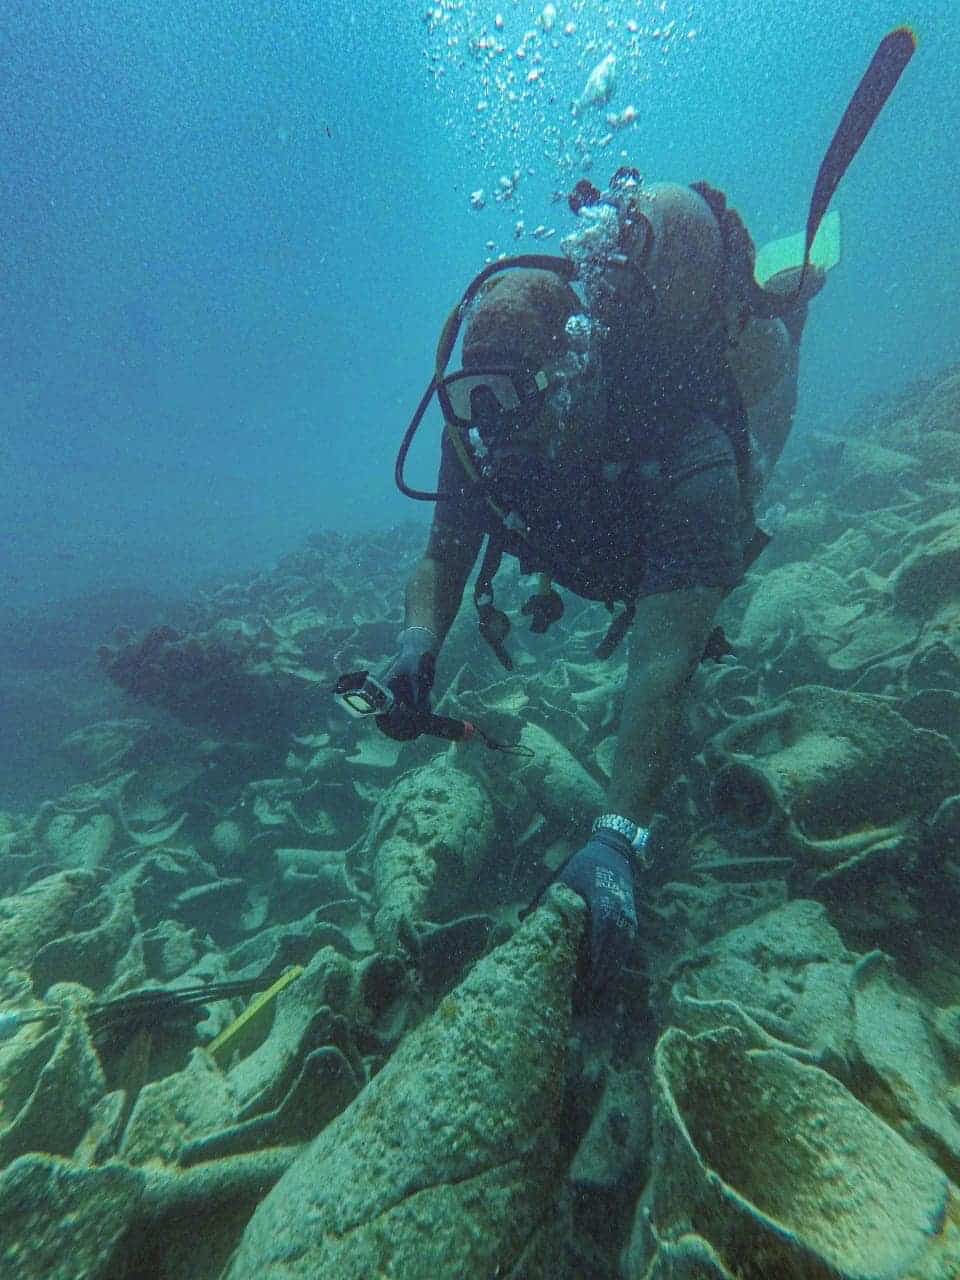 Underwater archaeologist at the site